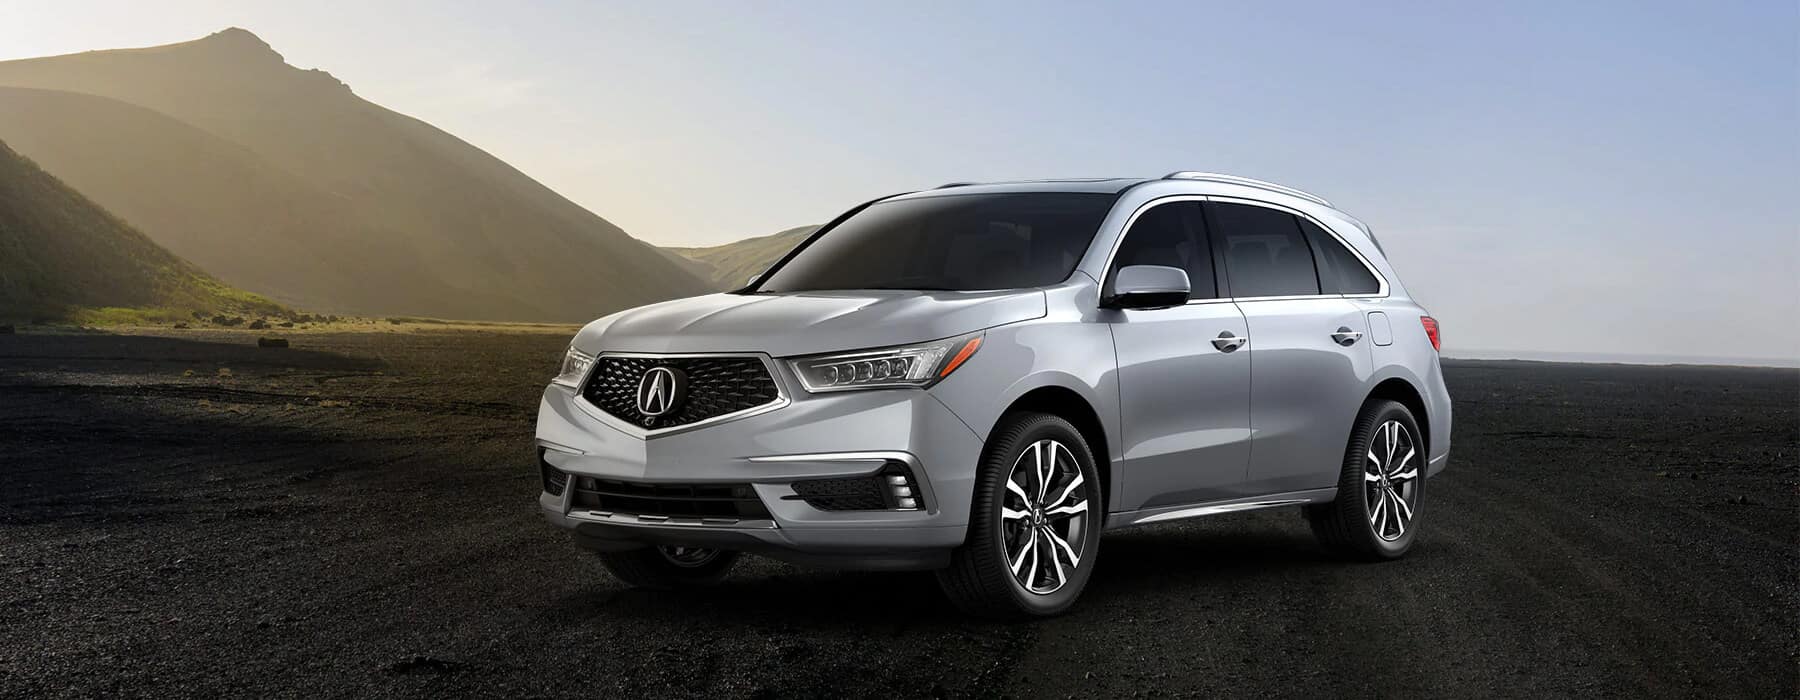 Compare Acura MDX Trim Levels | MDX Packages | Vern Eide Acura